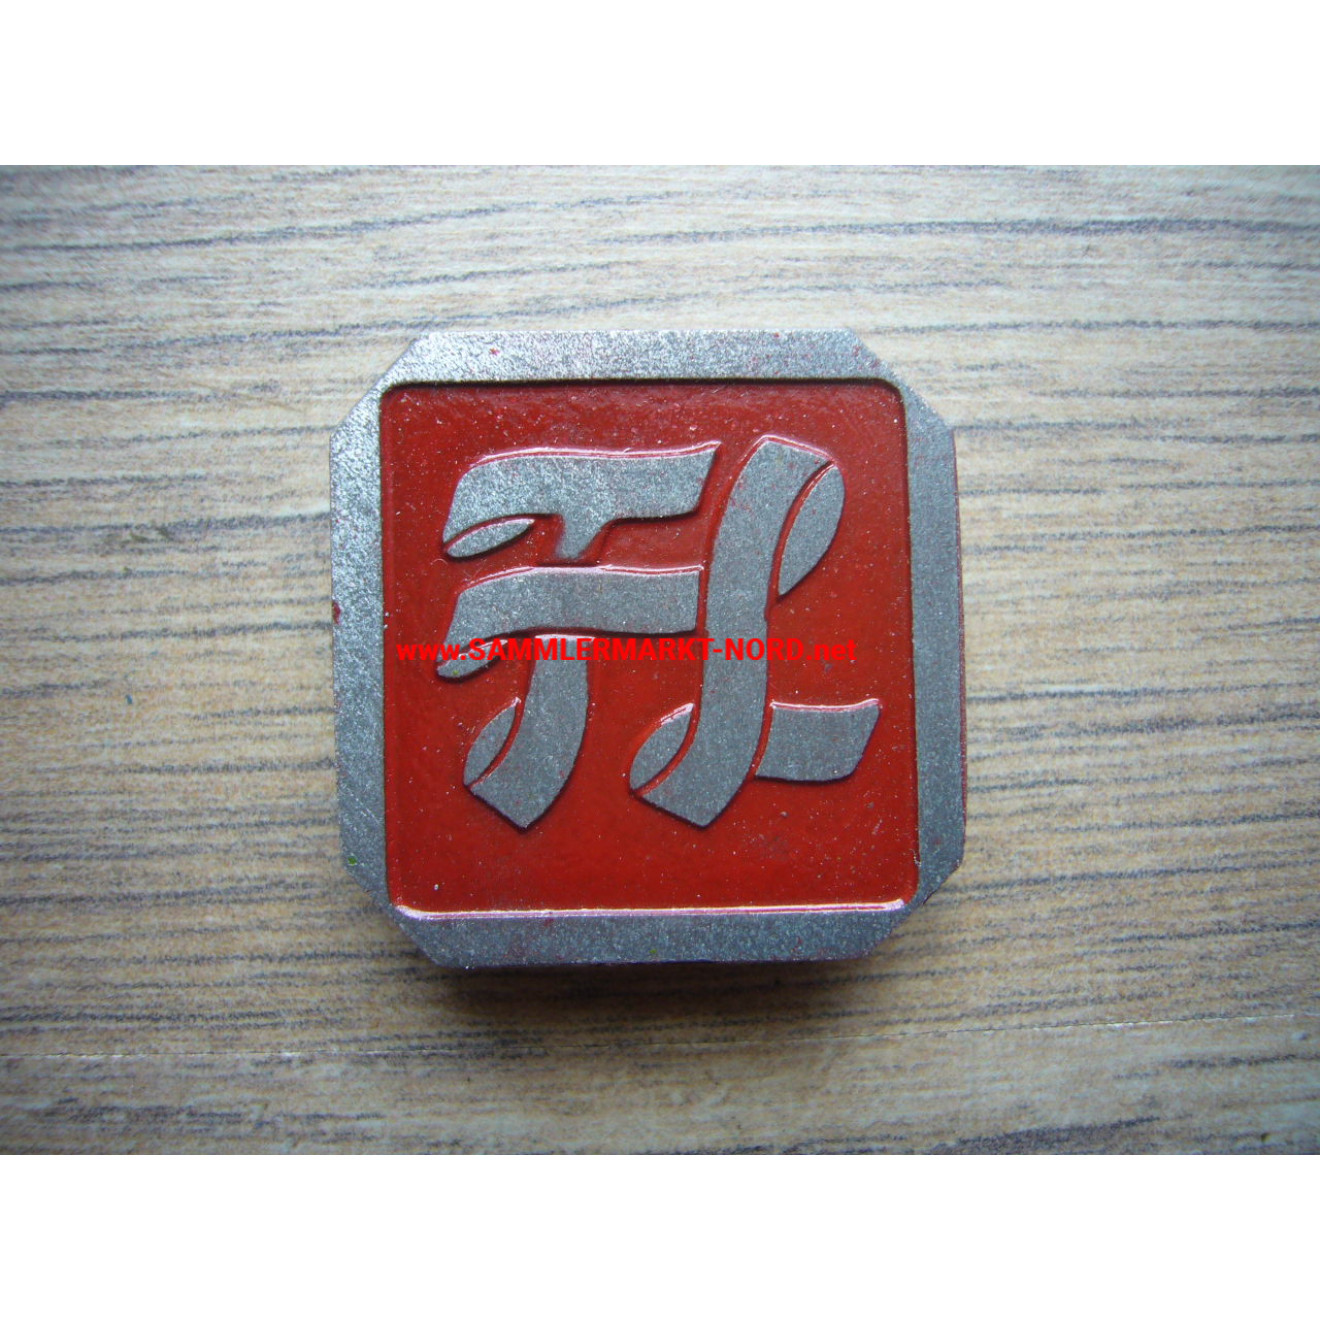 FAHLBERG-LIST company, Magdeburg - armaments factory - identity badge for employees (red, buttonhole)